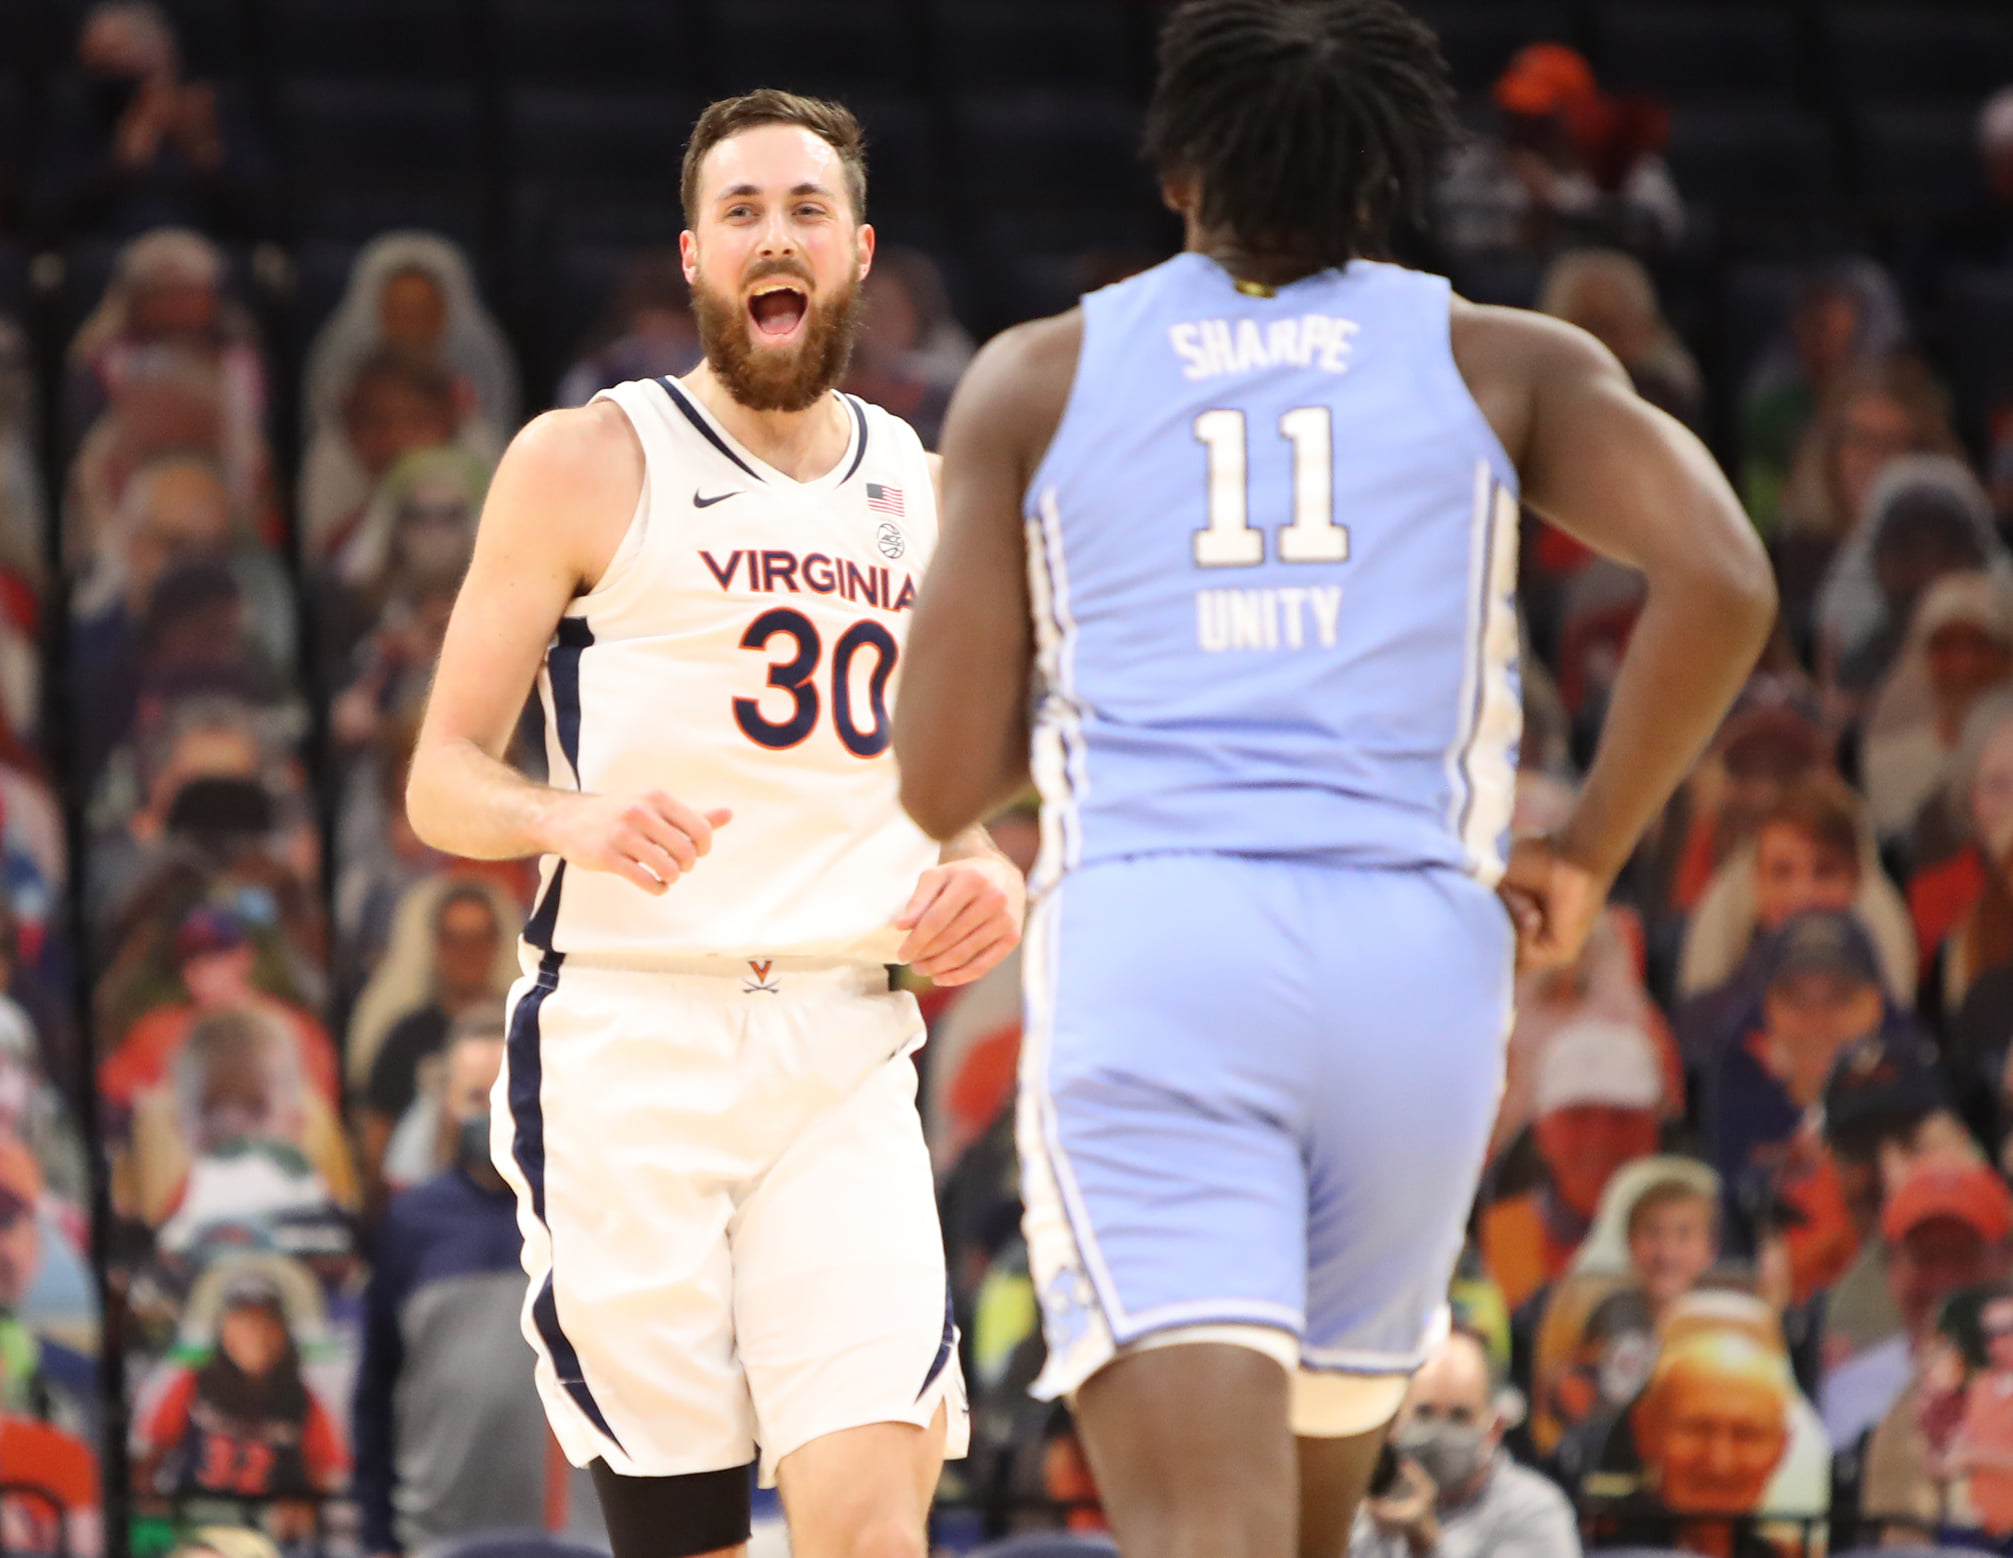 Virginia is 11-1 in the ACC.